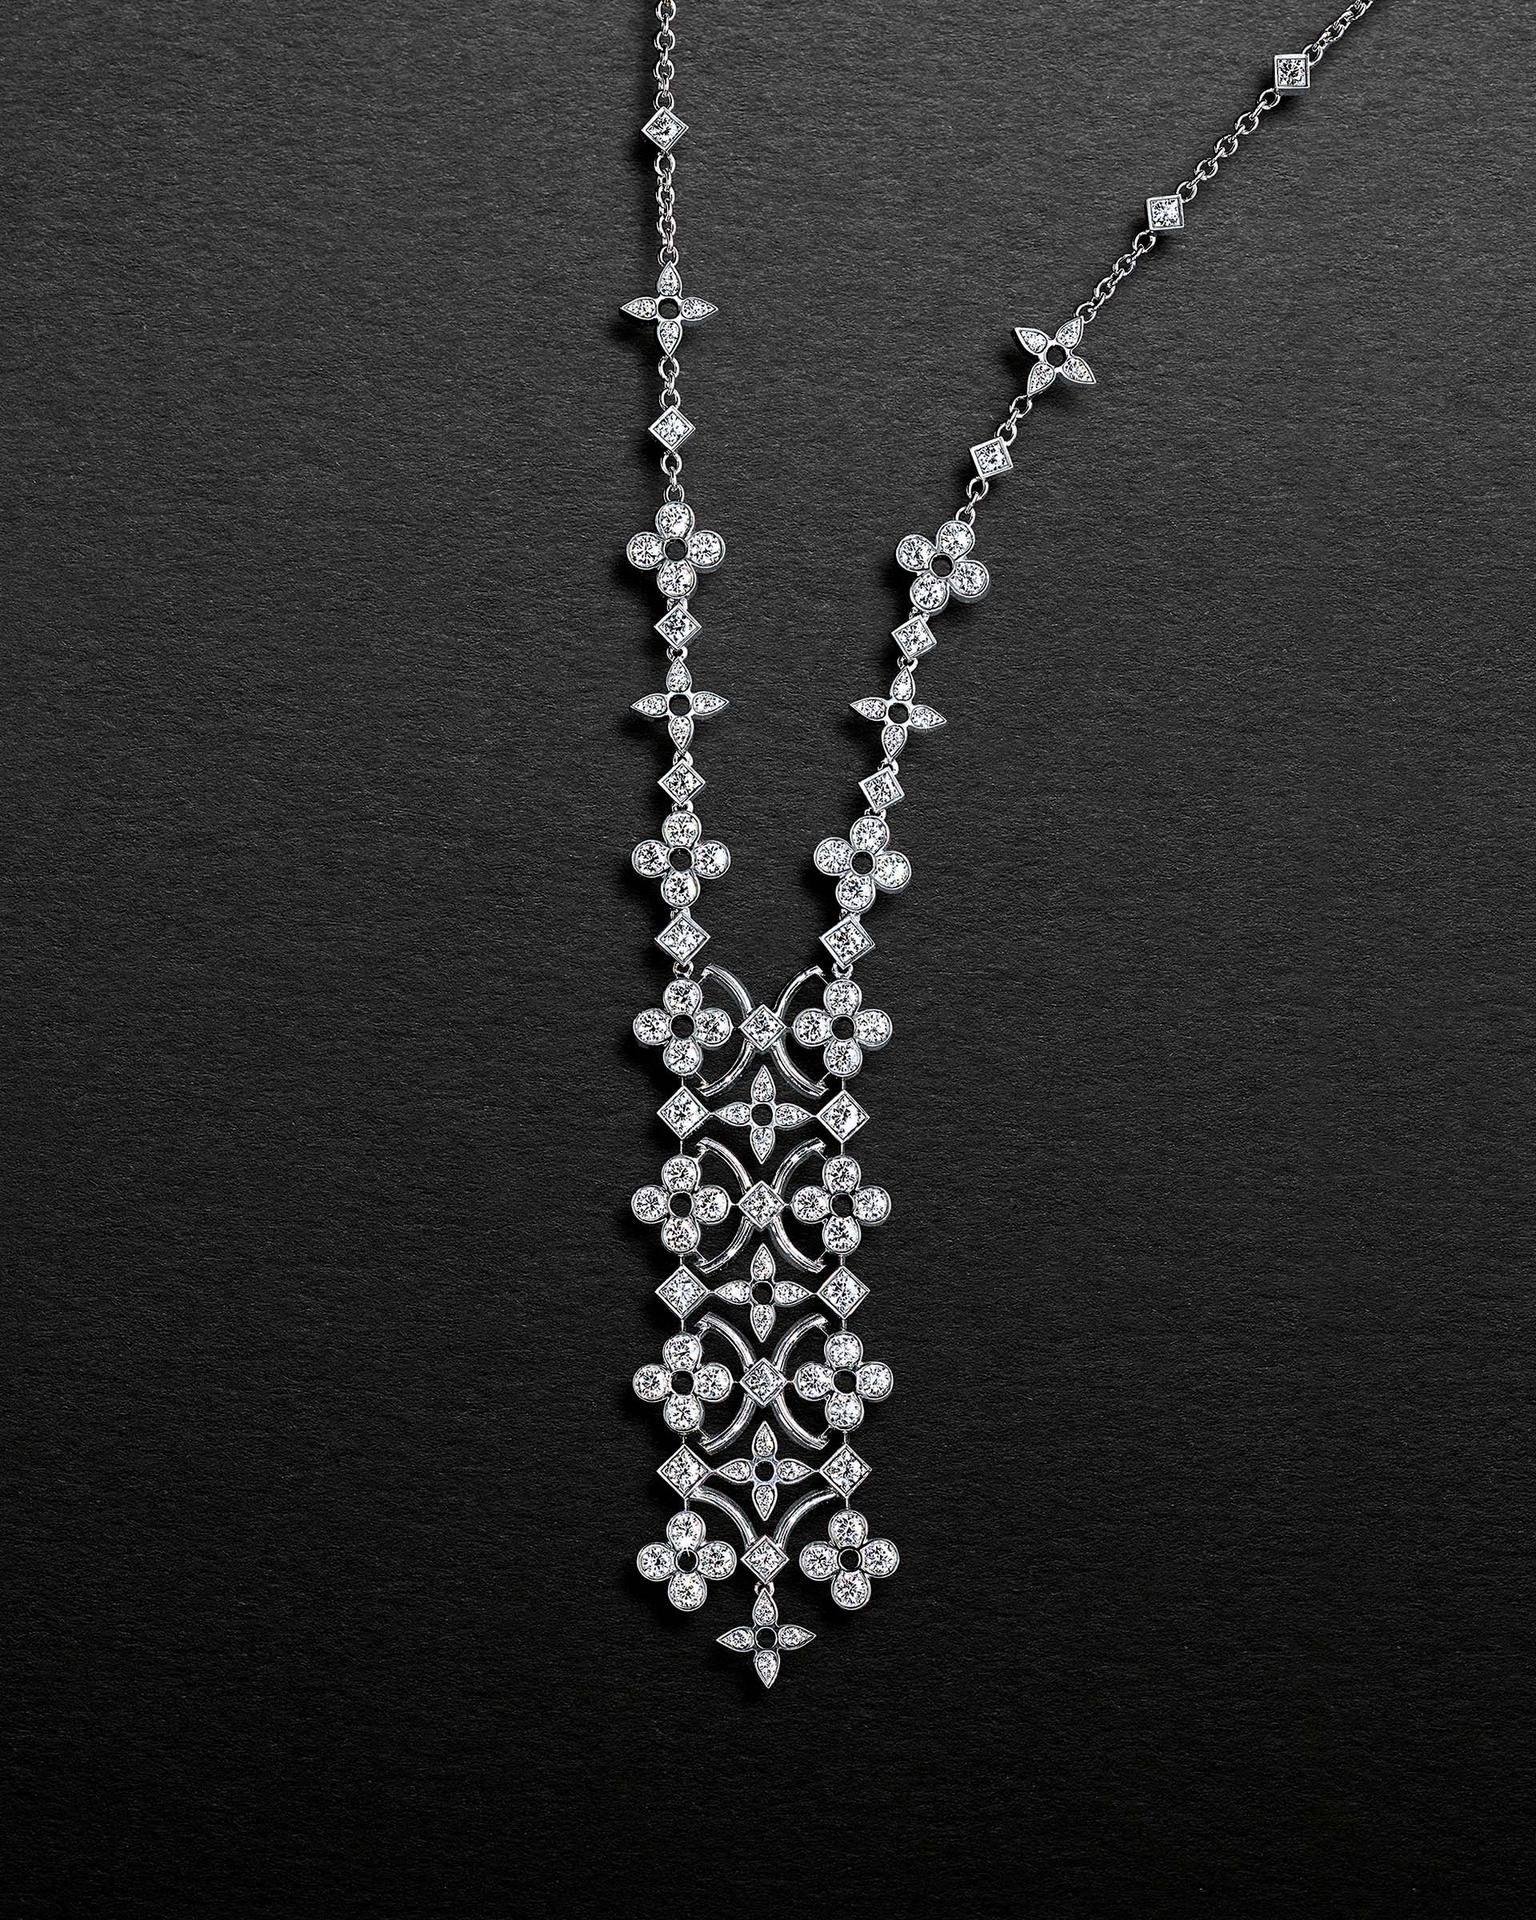 At first glance, the pattern of diamonds in the new Louis